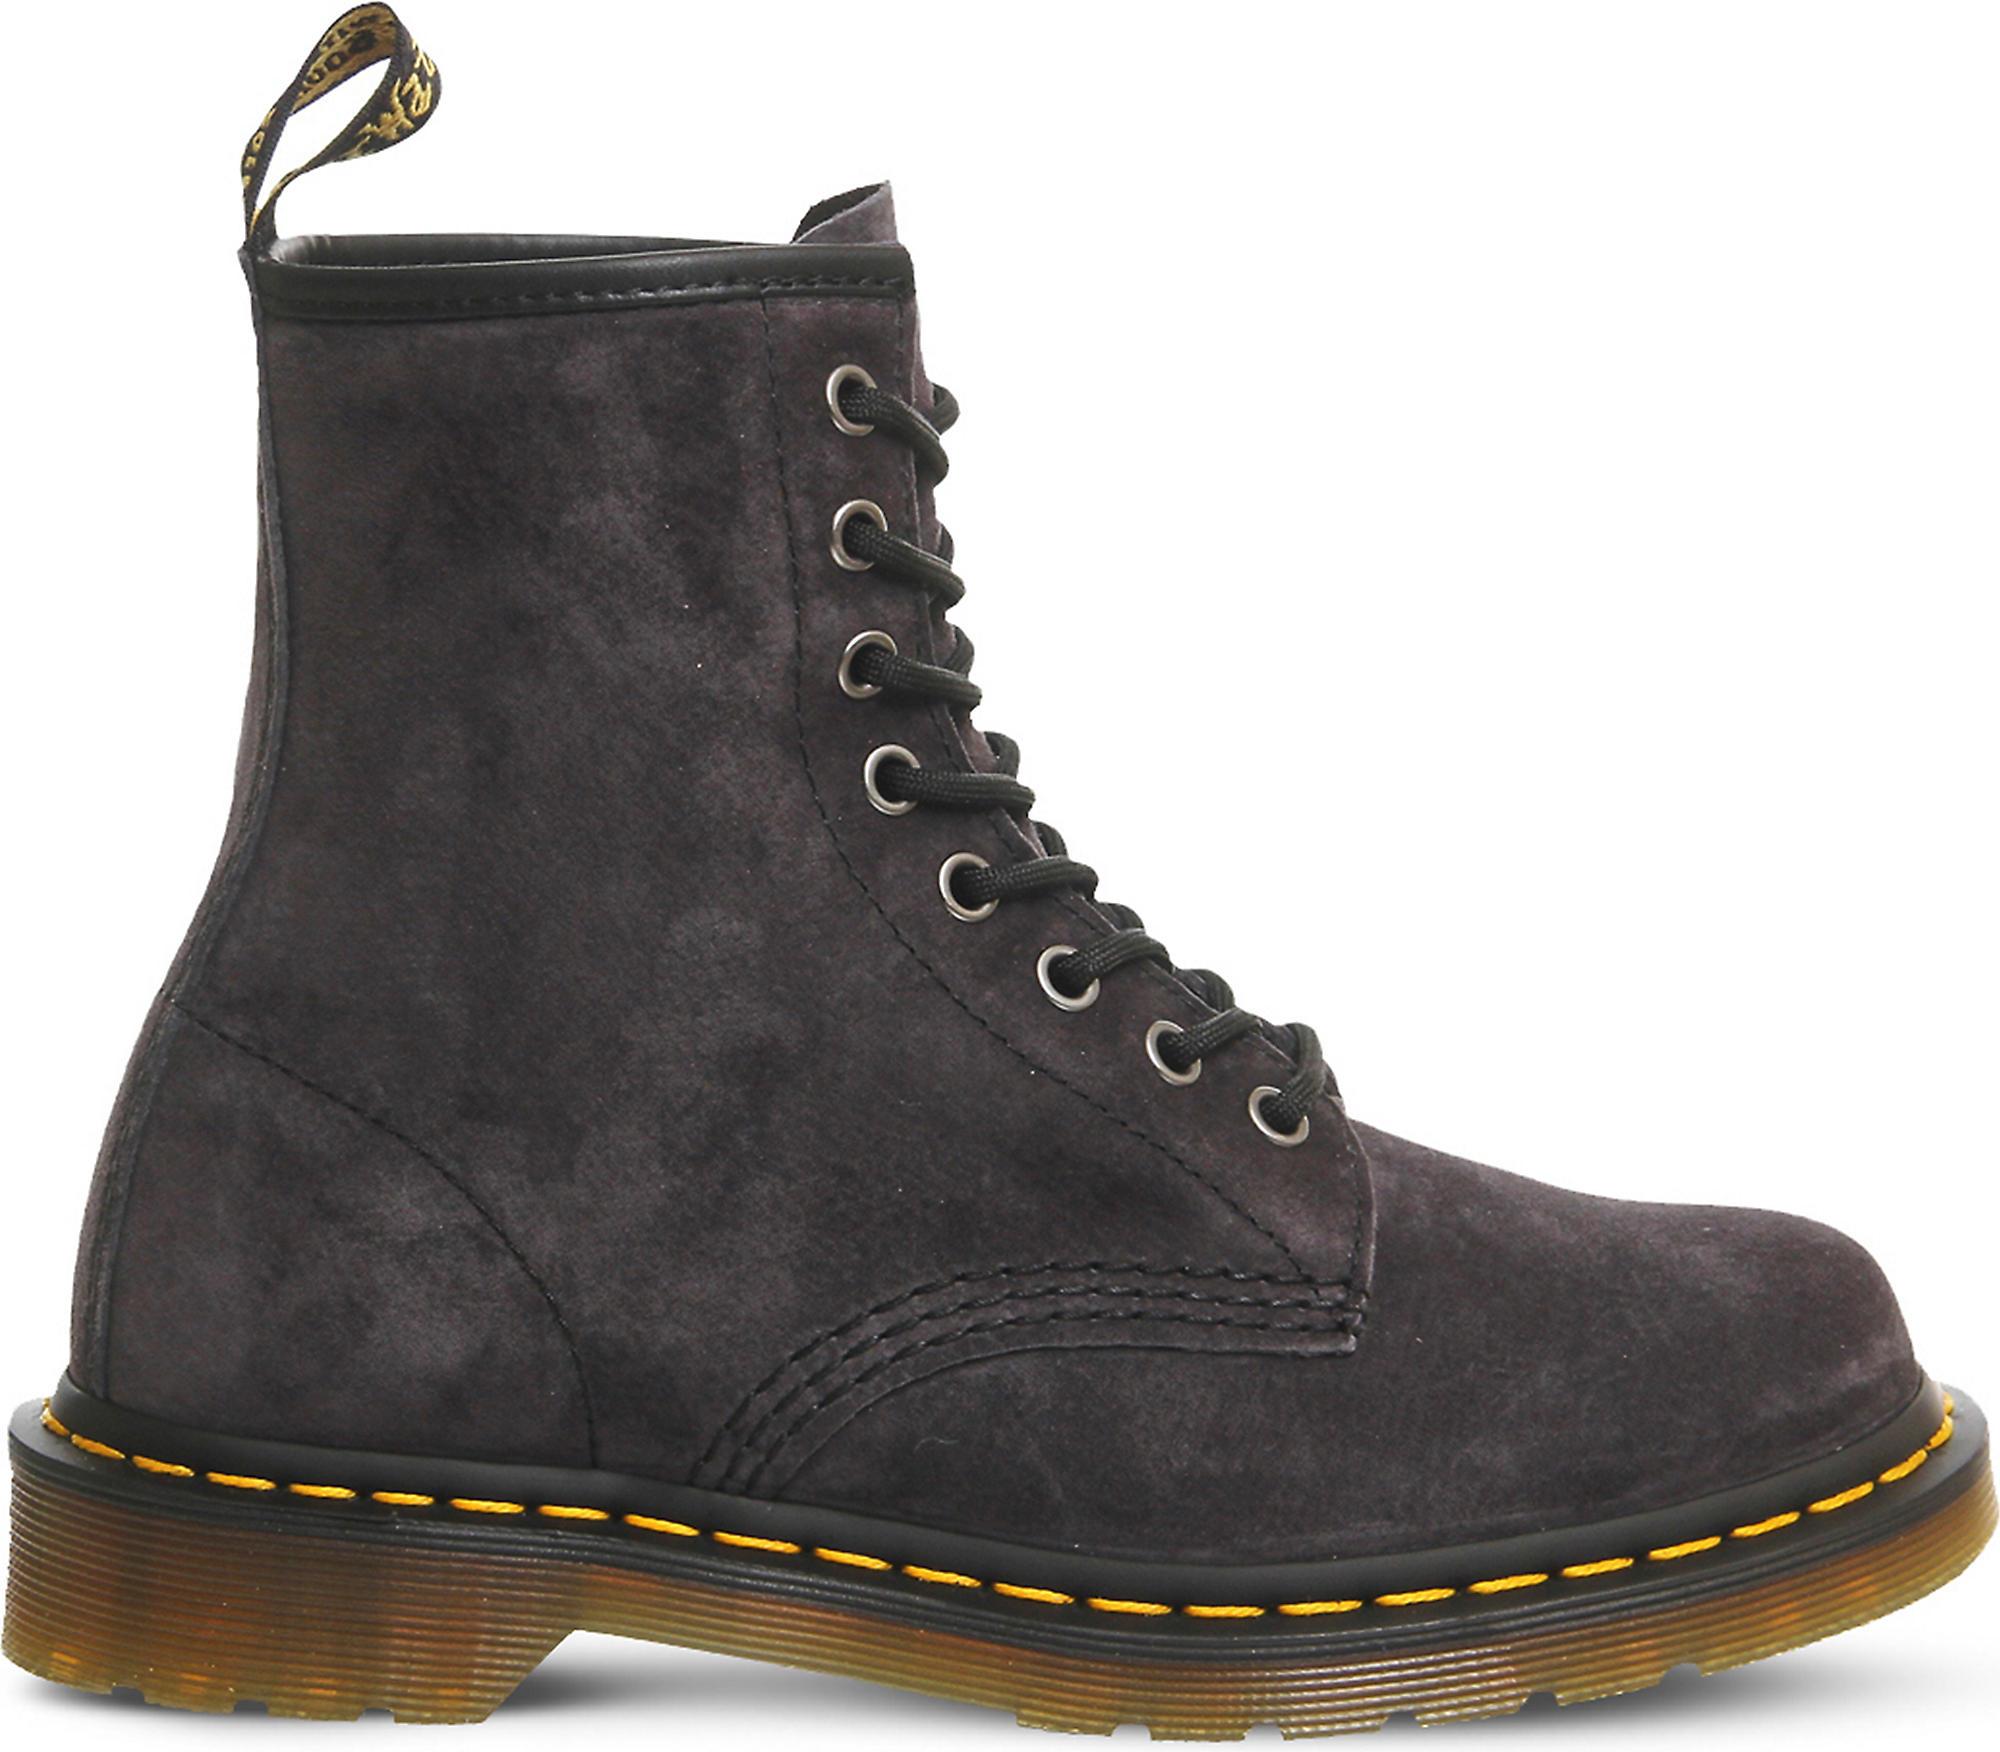 Dr. Martens 8-eyelet Suede Boots in Graphite Grey Suede (Gray) - Lyst